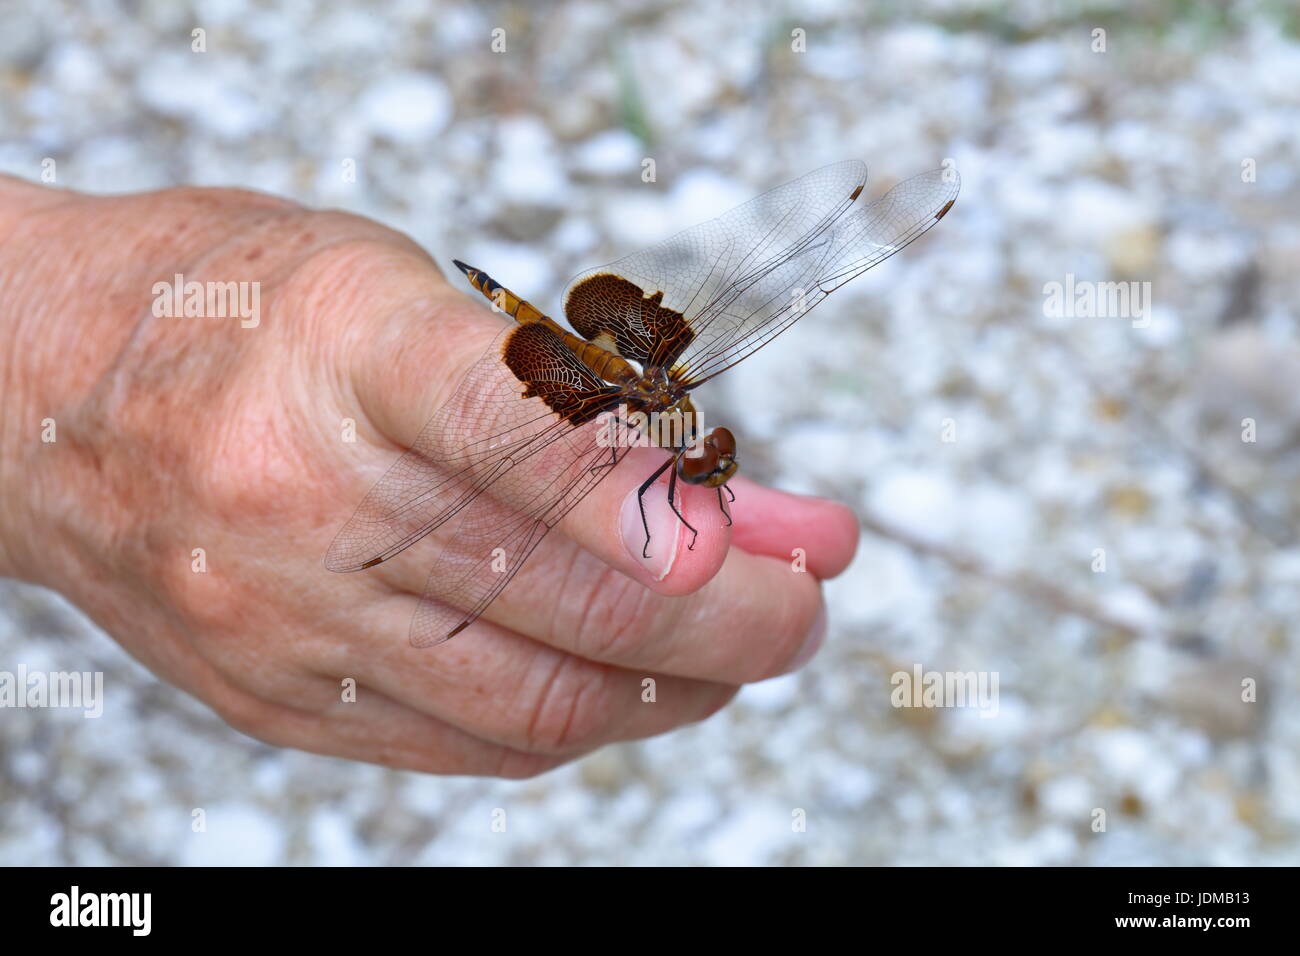 A red saddlebags dragonfly, Tramea onusta, resting on a man's hand. Stock Photo